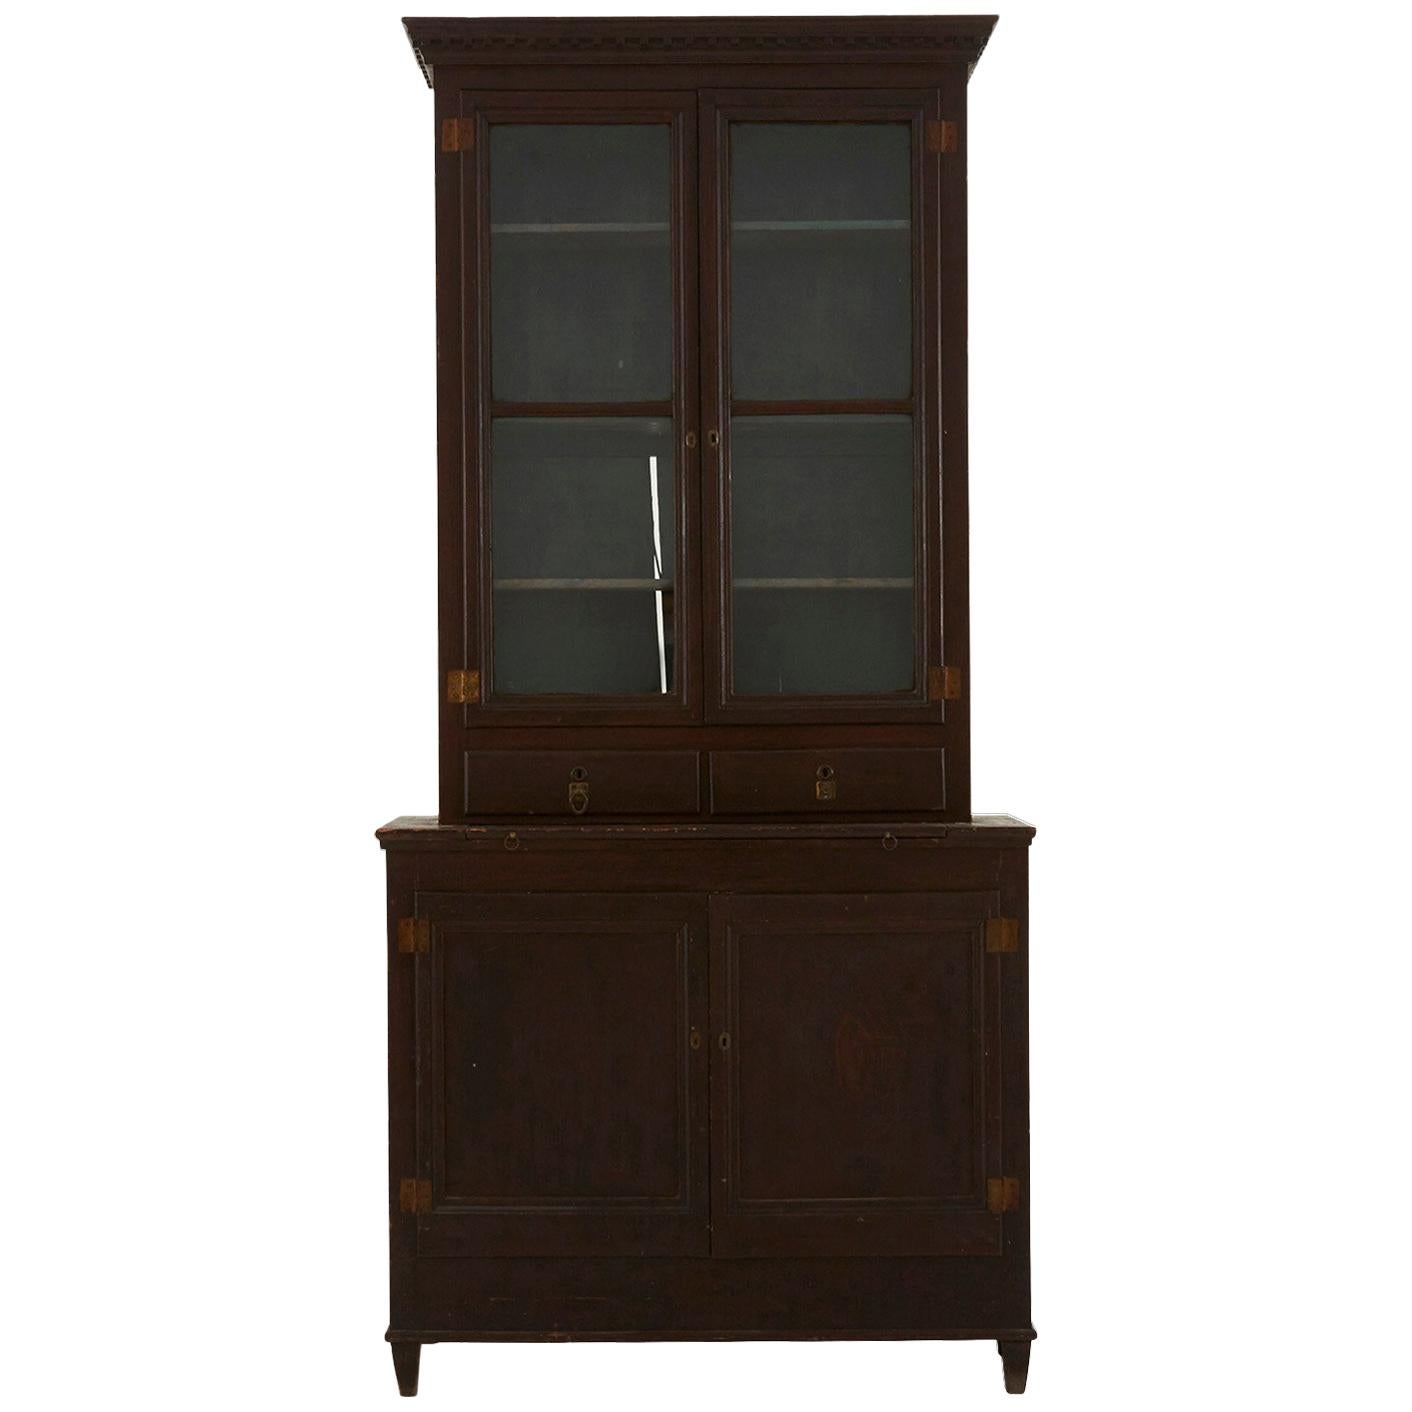 Early 20th Century Wooden Breakfront Cabinet